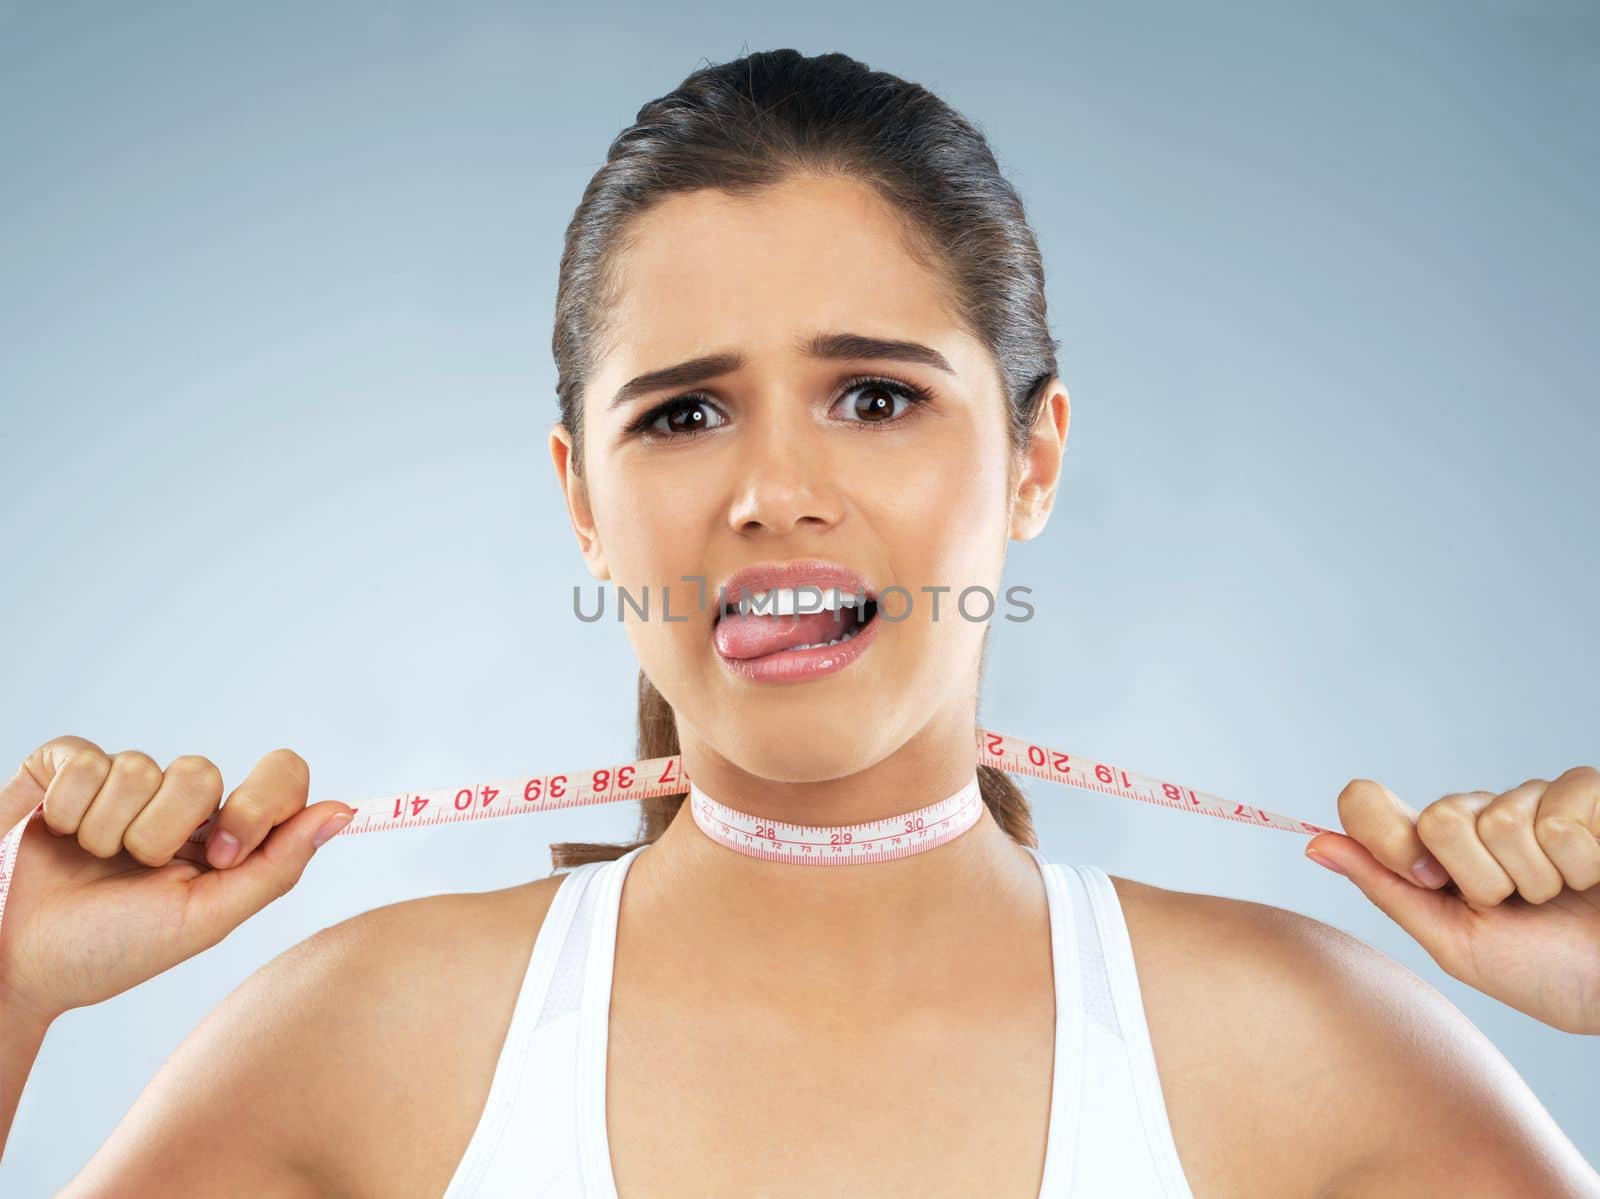 Dieting will be the death of me. Studio portrait of an attractive young woman with a measuring tape wrapped around her neck against a grey background